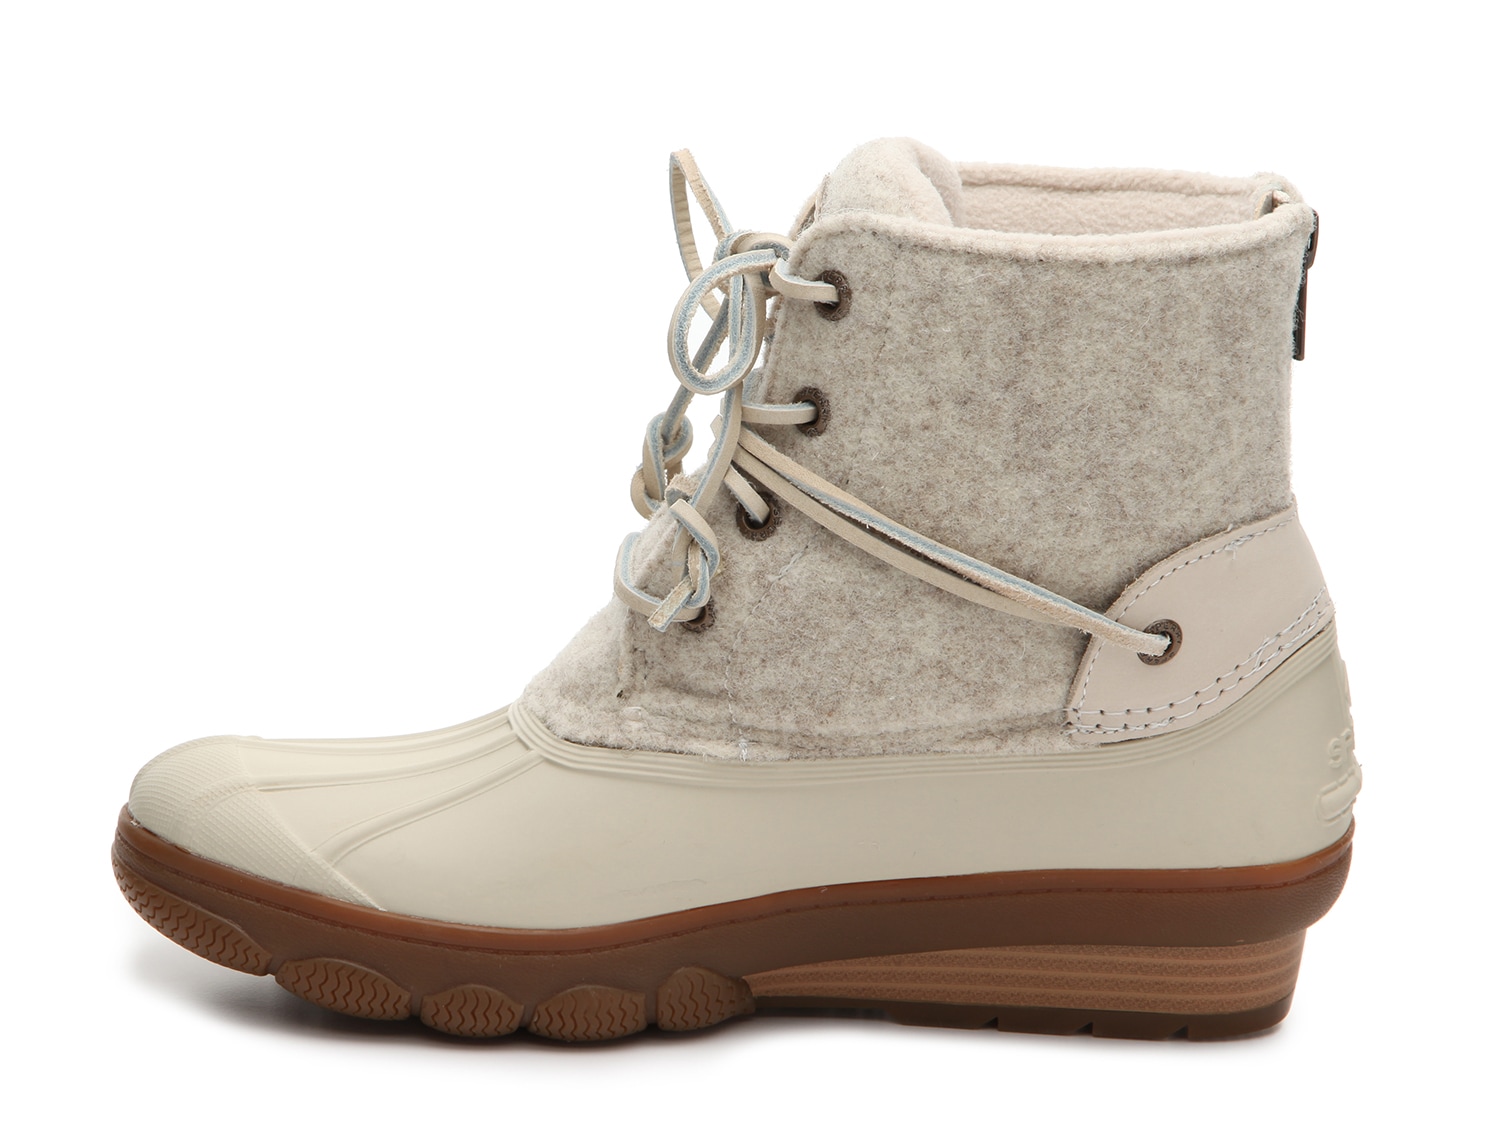 sperry saltwater tide wedge boot